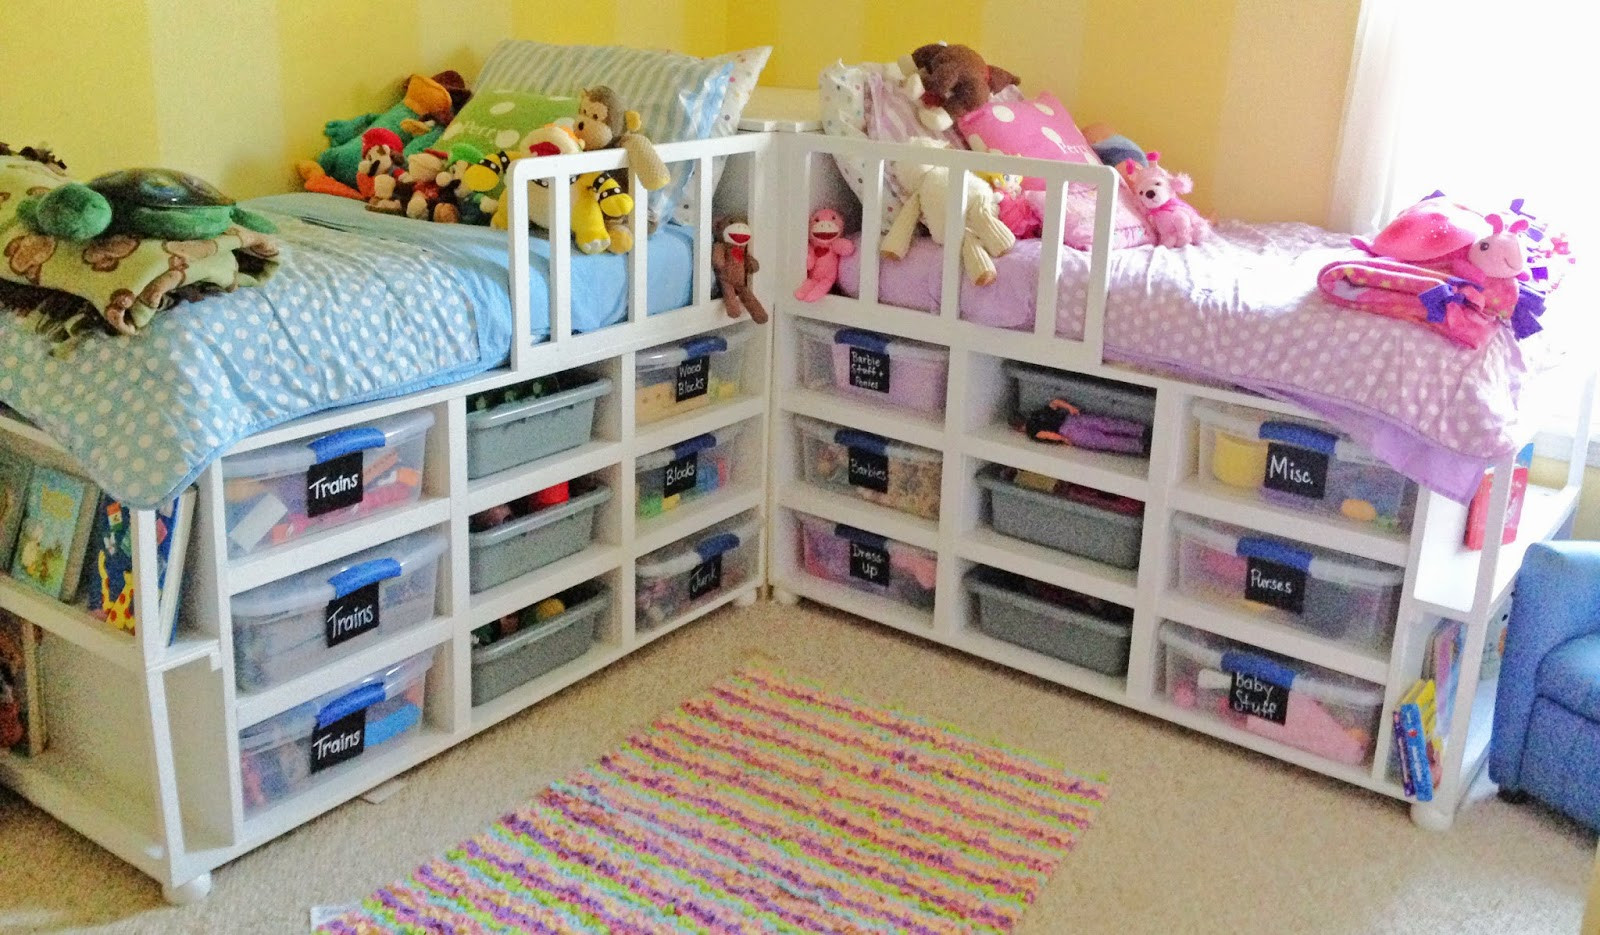 Diy Kids Bed With Storage
 From A to Being DIY Toddler Storage Beds